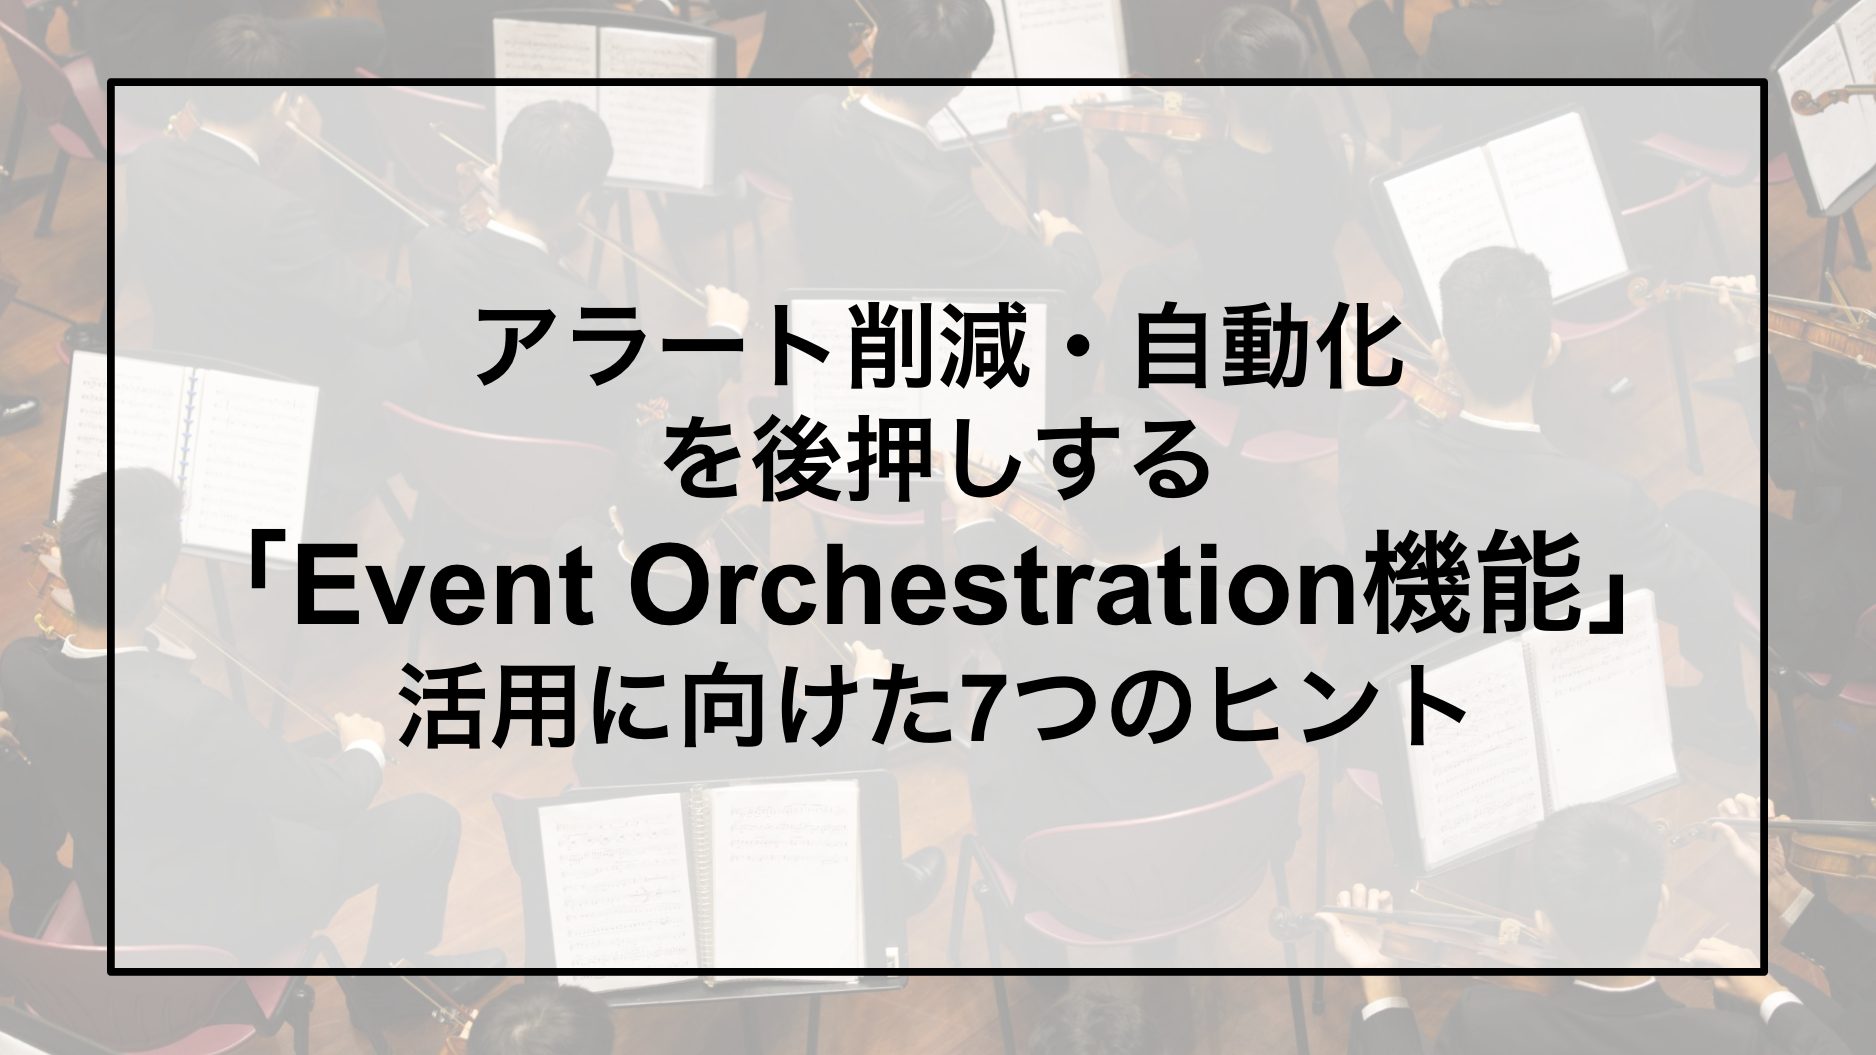 Event Orchestration７つのヒント